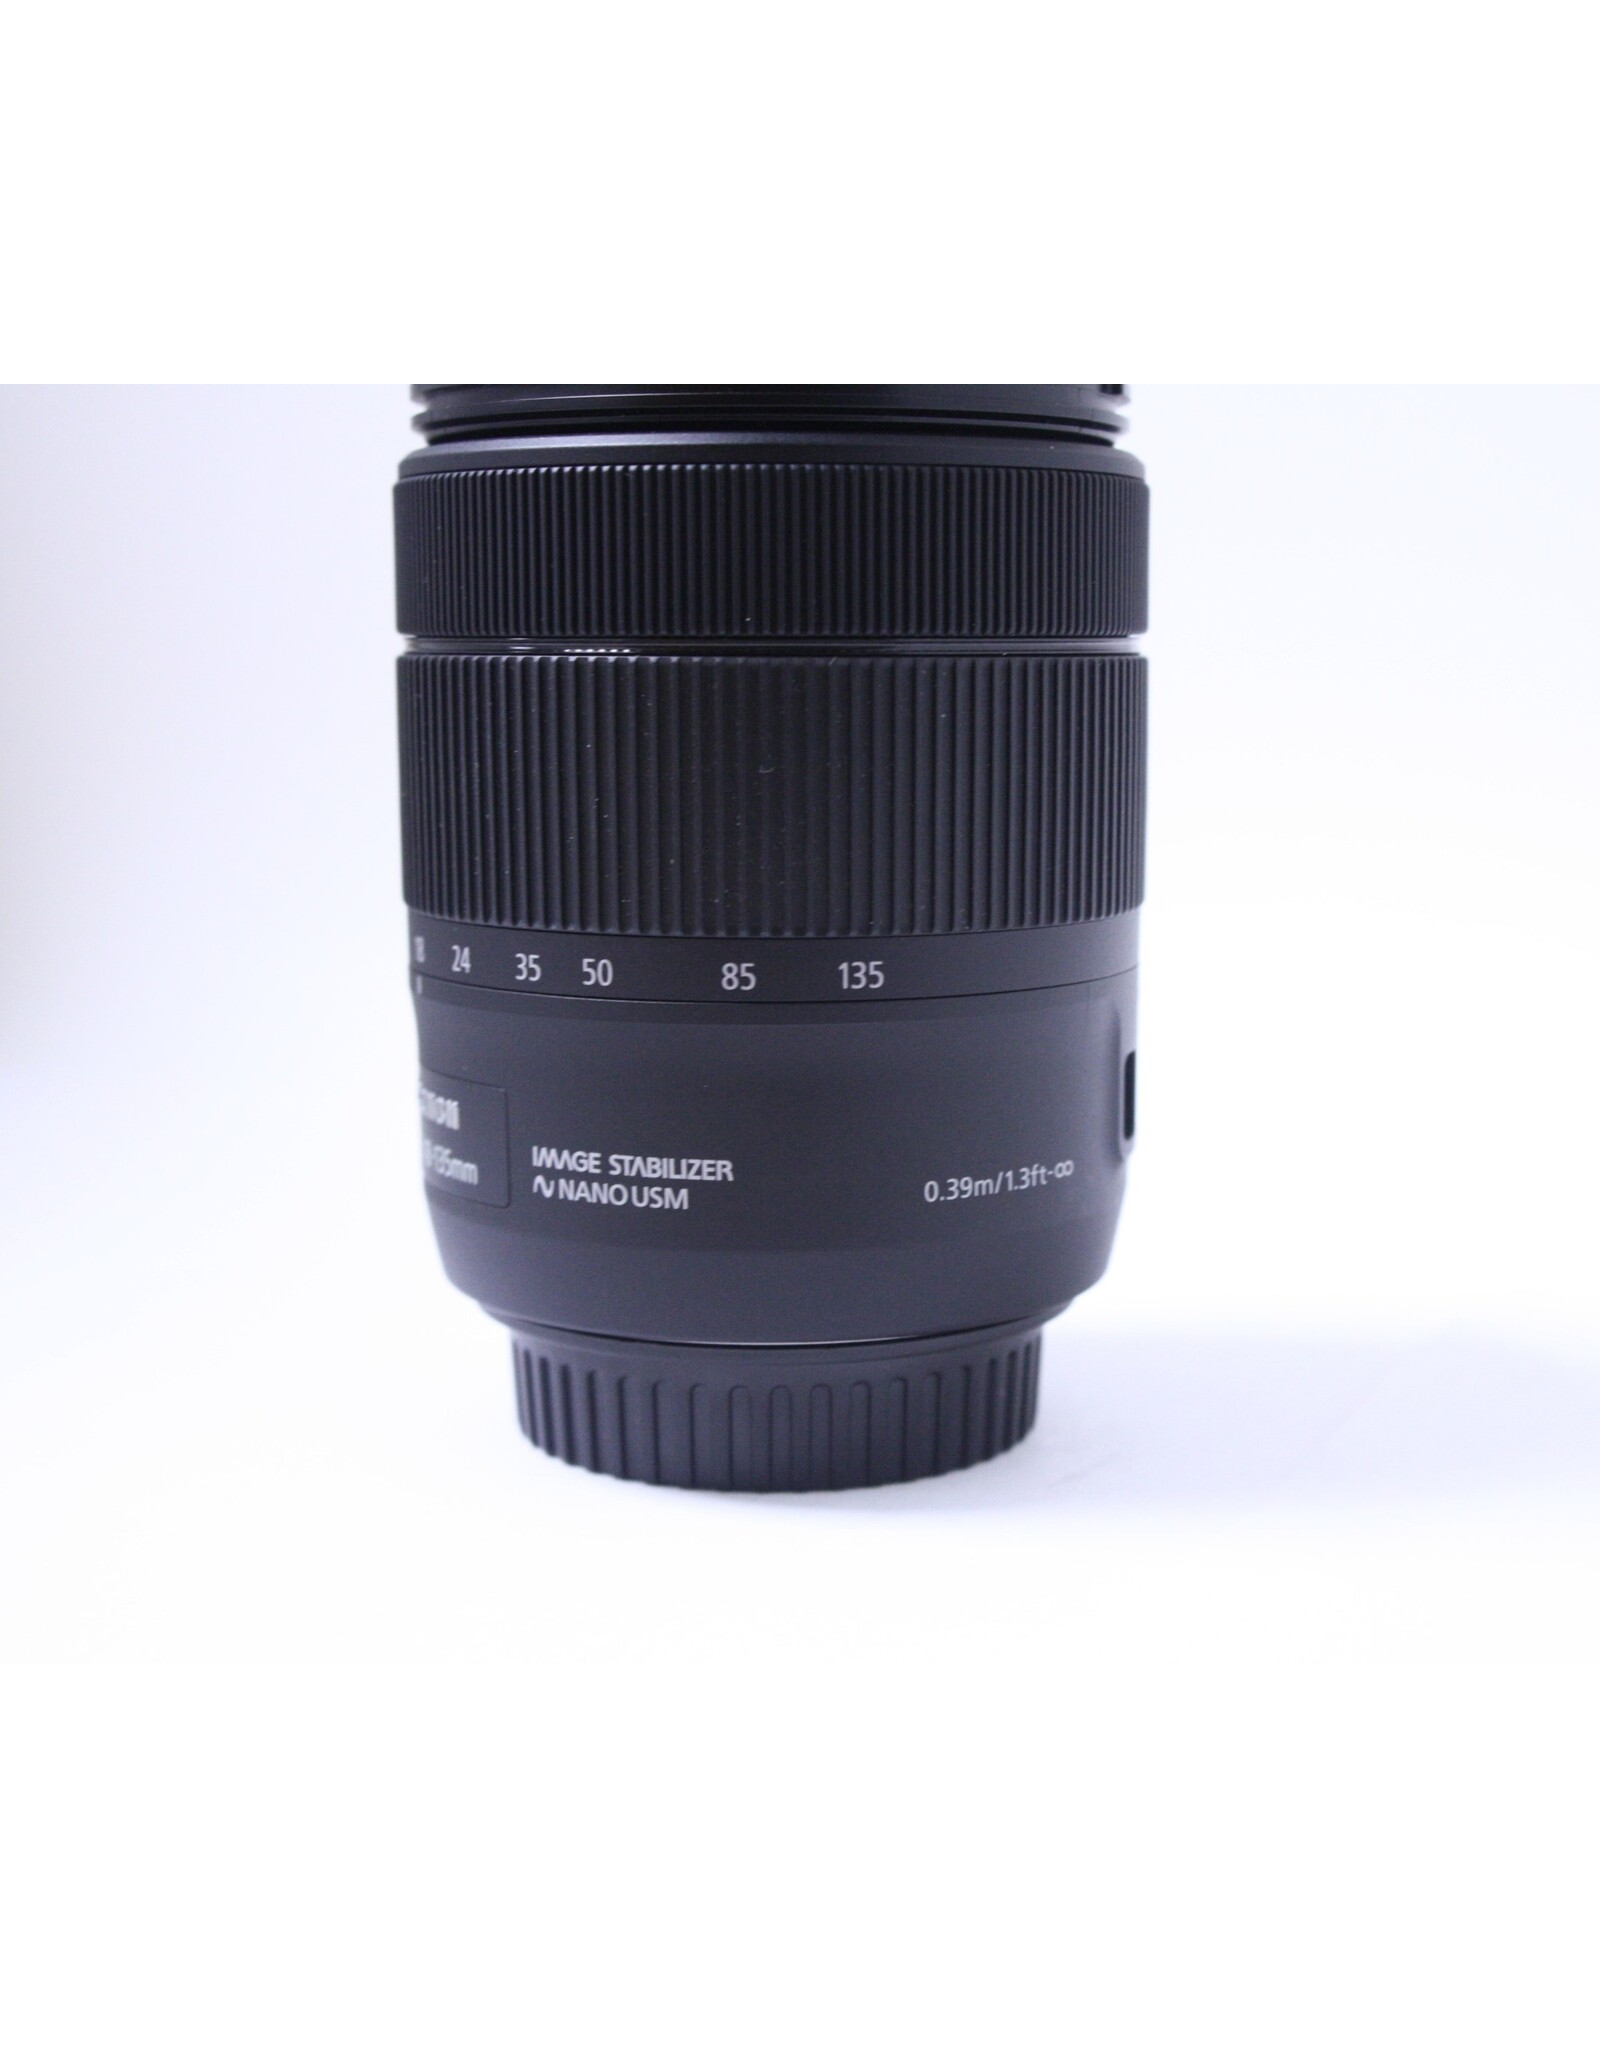 Canon CANON EF-S 18-135mm f/3.5-5.6 IS NANO USM ZOOM LENS (Pre-owned)